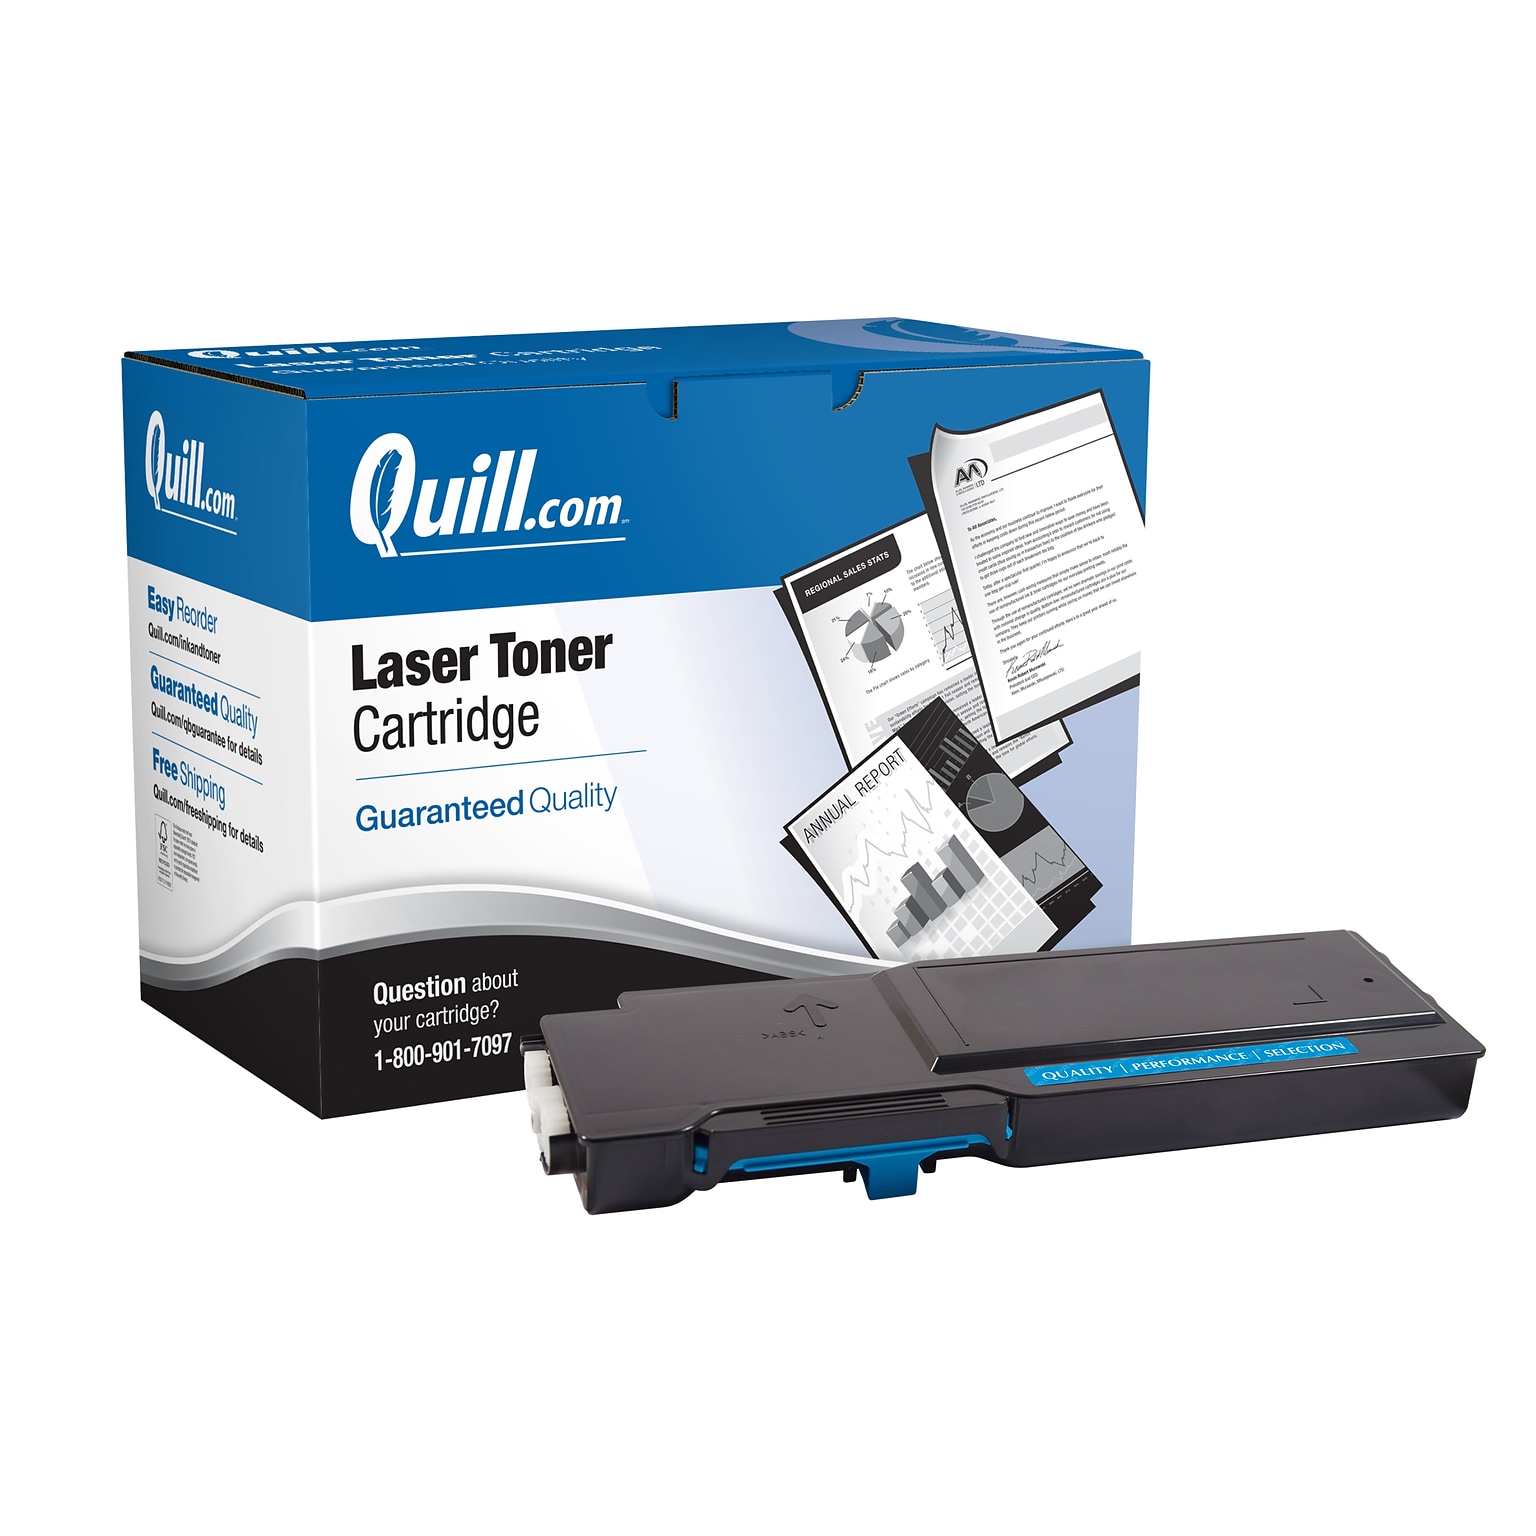 Quill Brand® Remanufactured Cyan Standard Yield Toner Cartridge Replacement for Xerox 6600/6605 (106R02241) (Lifetime Warranty)